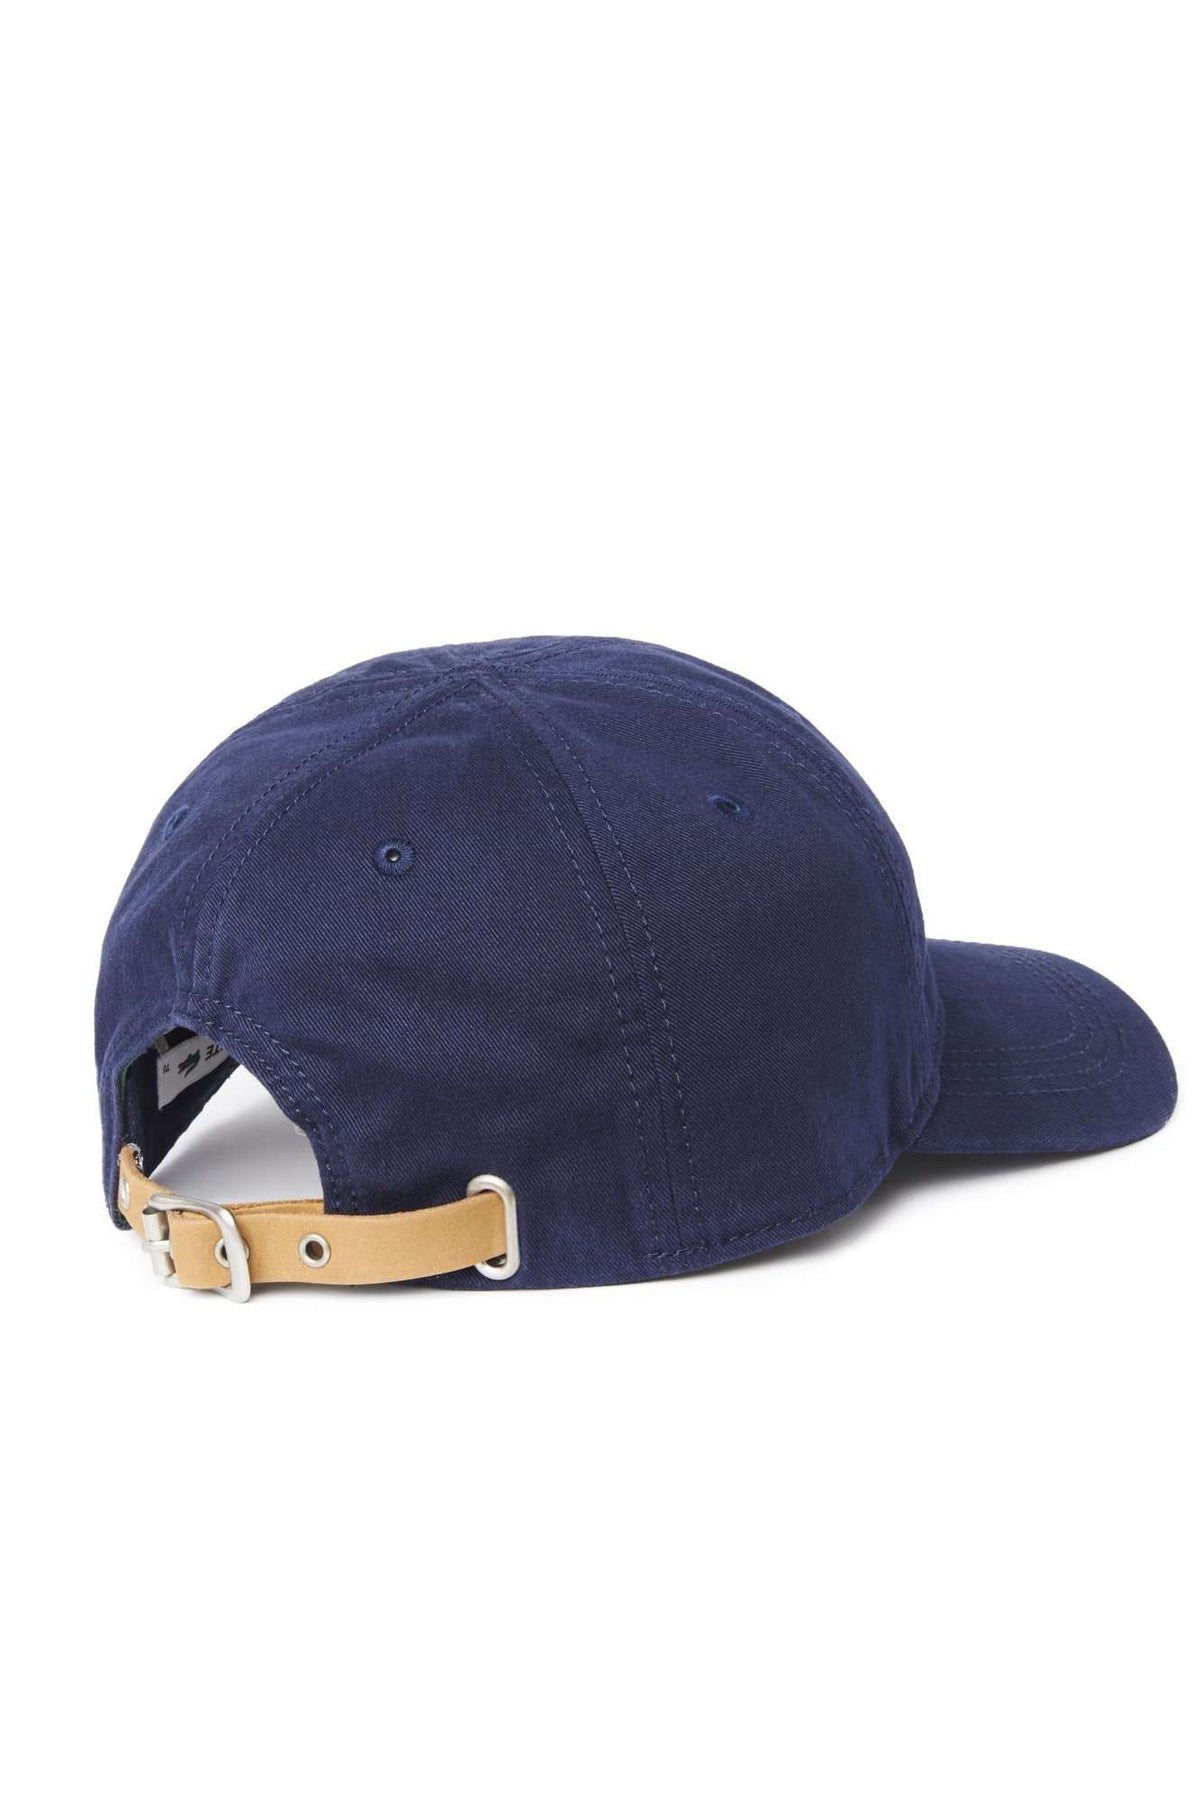 Large Croc Gabardine Cap in Navy by Lacoste - Country Club Prep